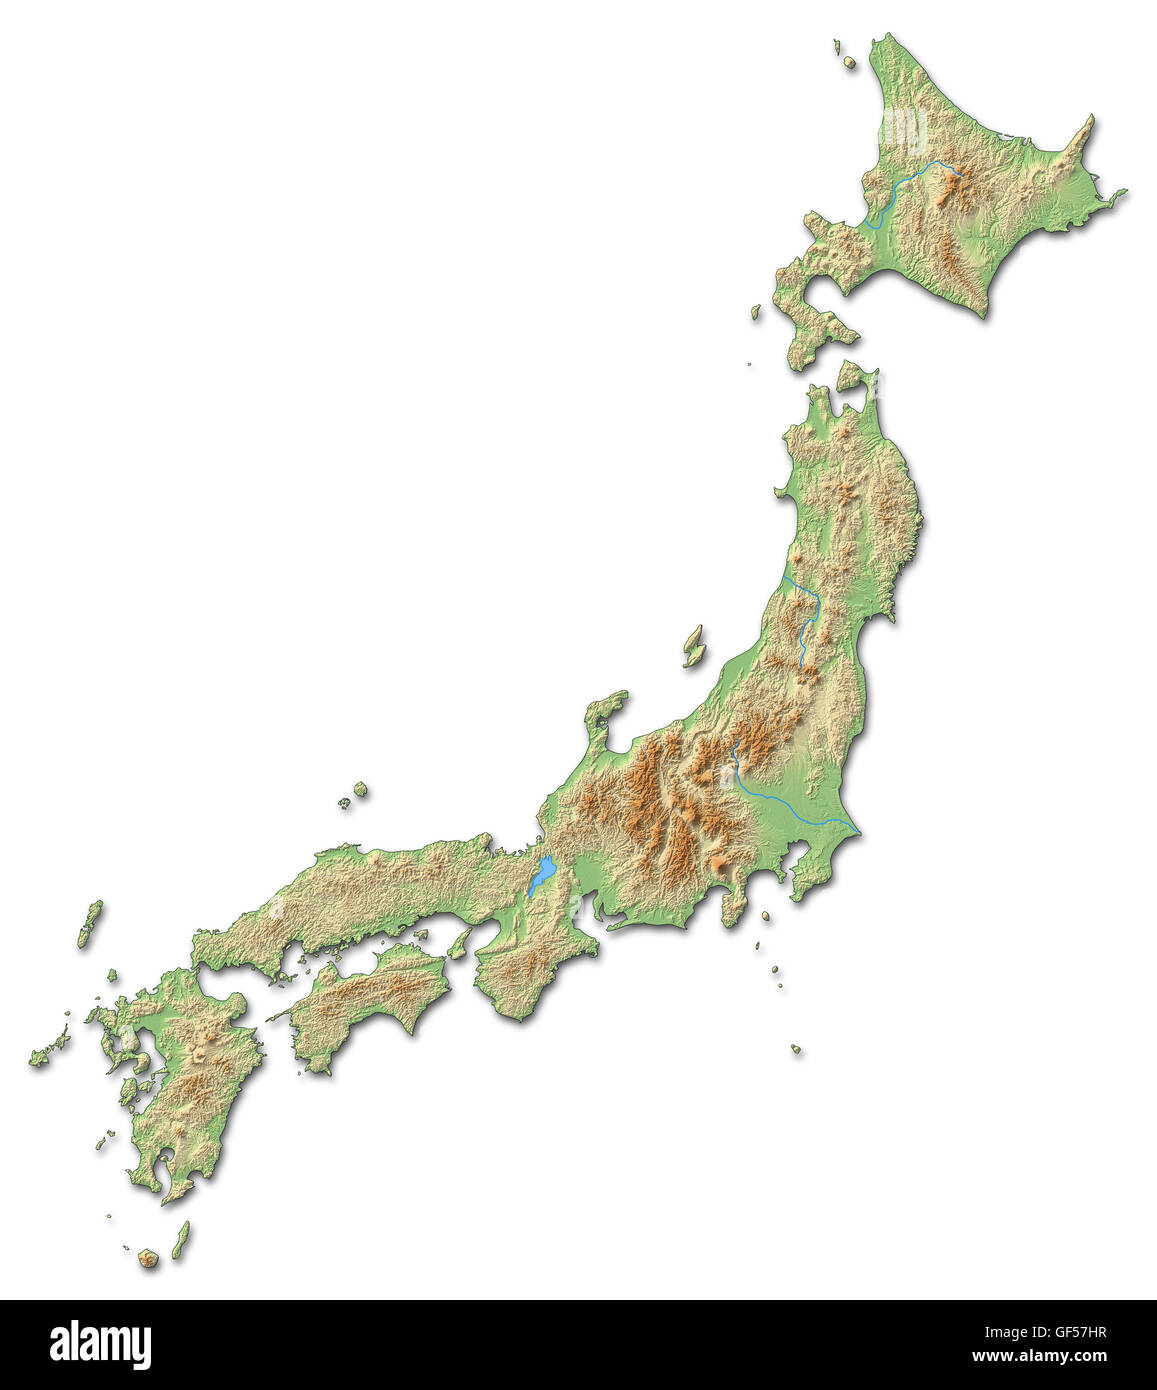 Relief map of Japan with shaded relief. Stock Photo